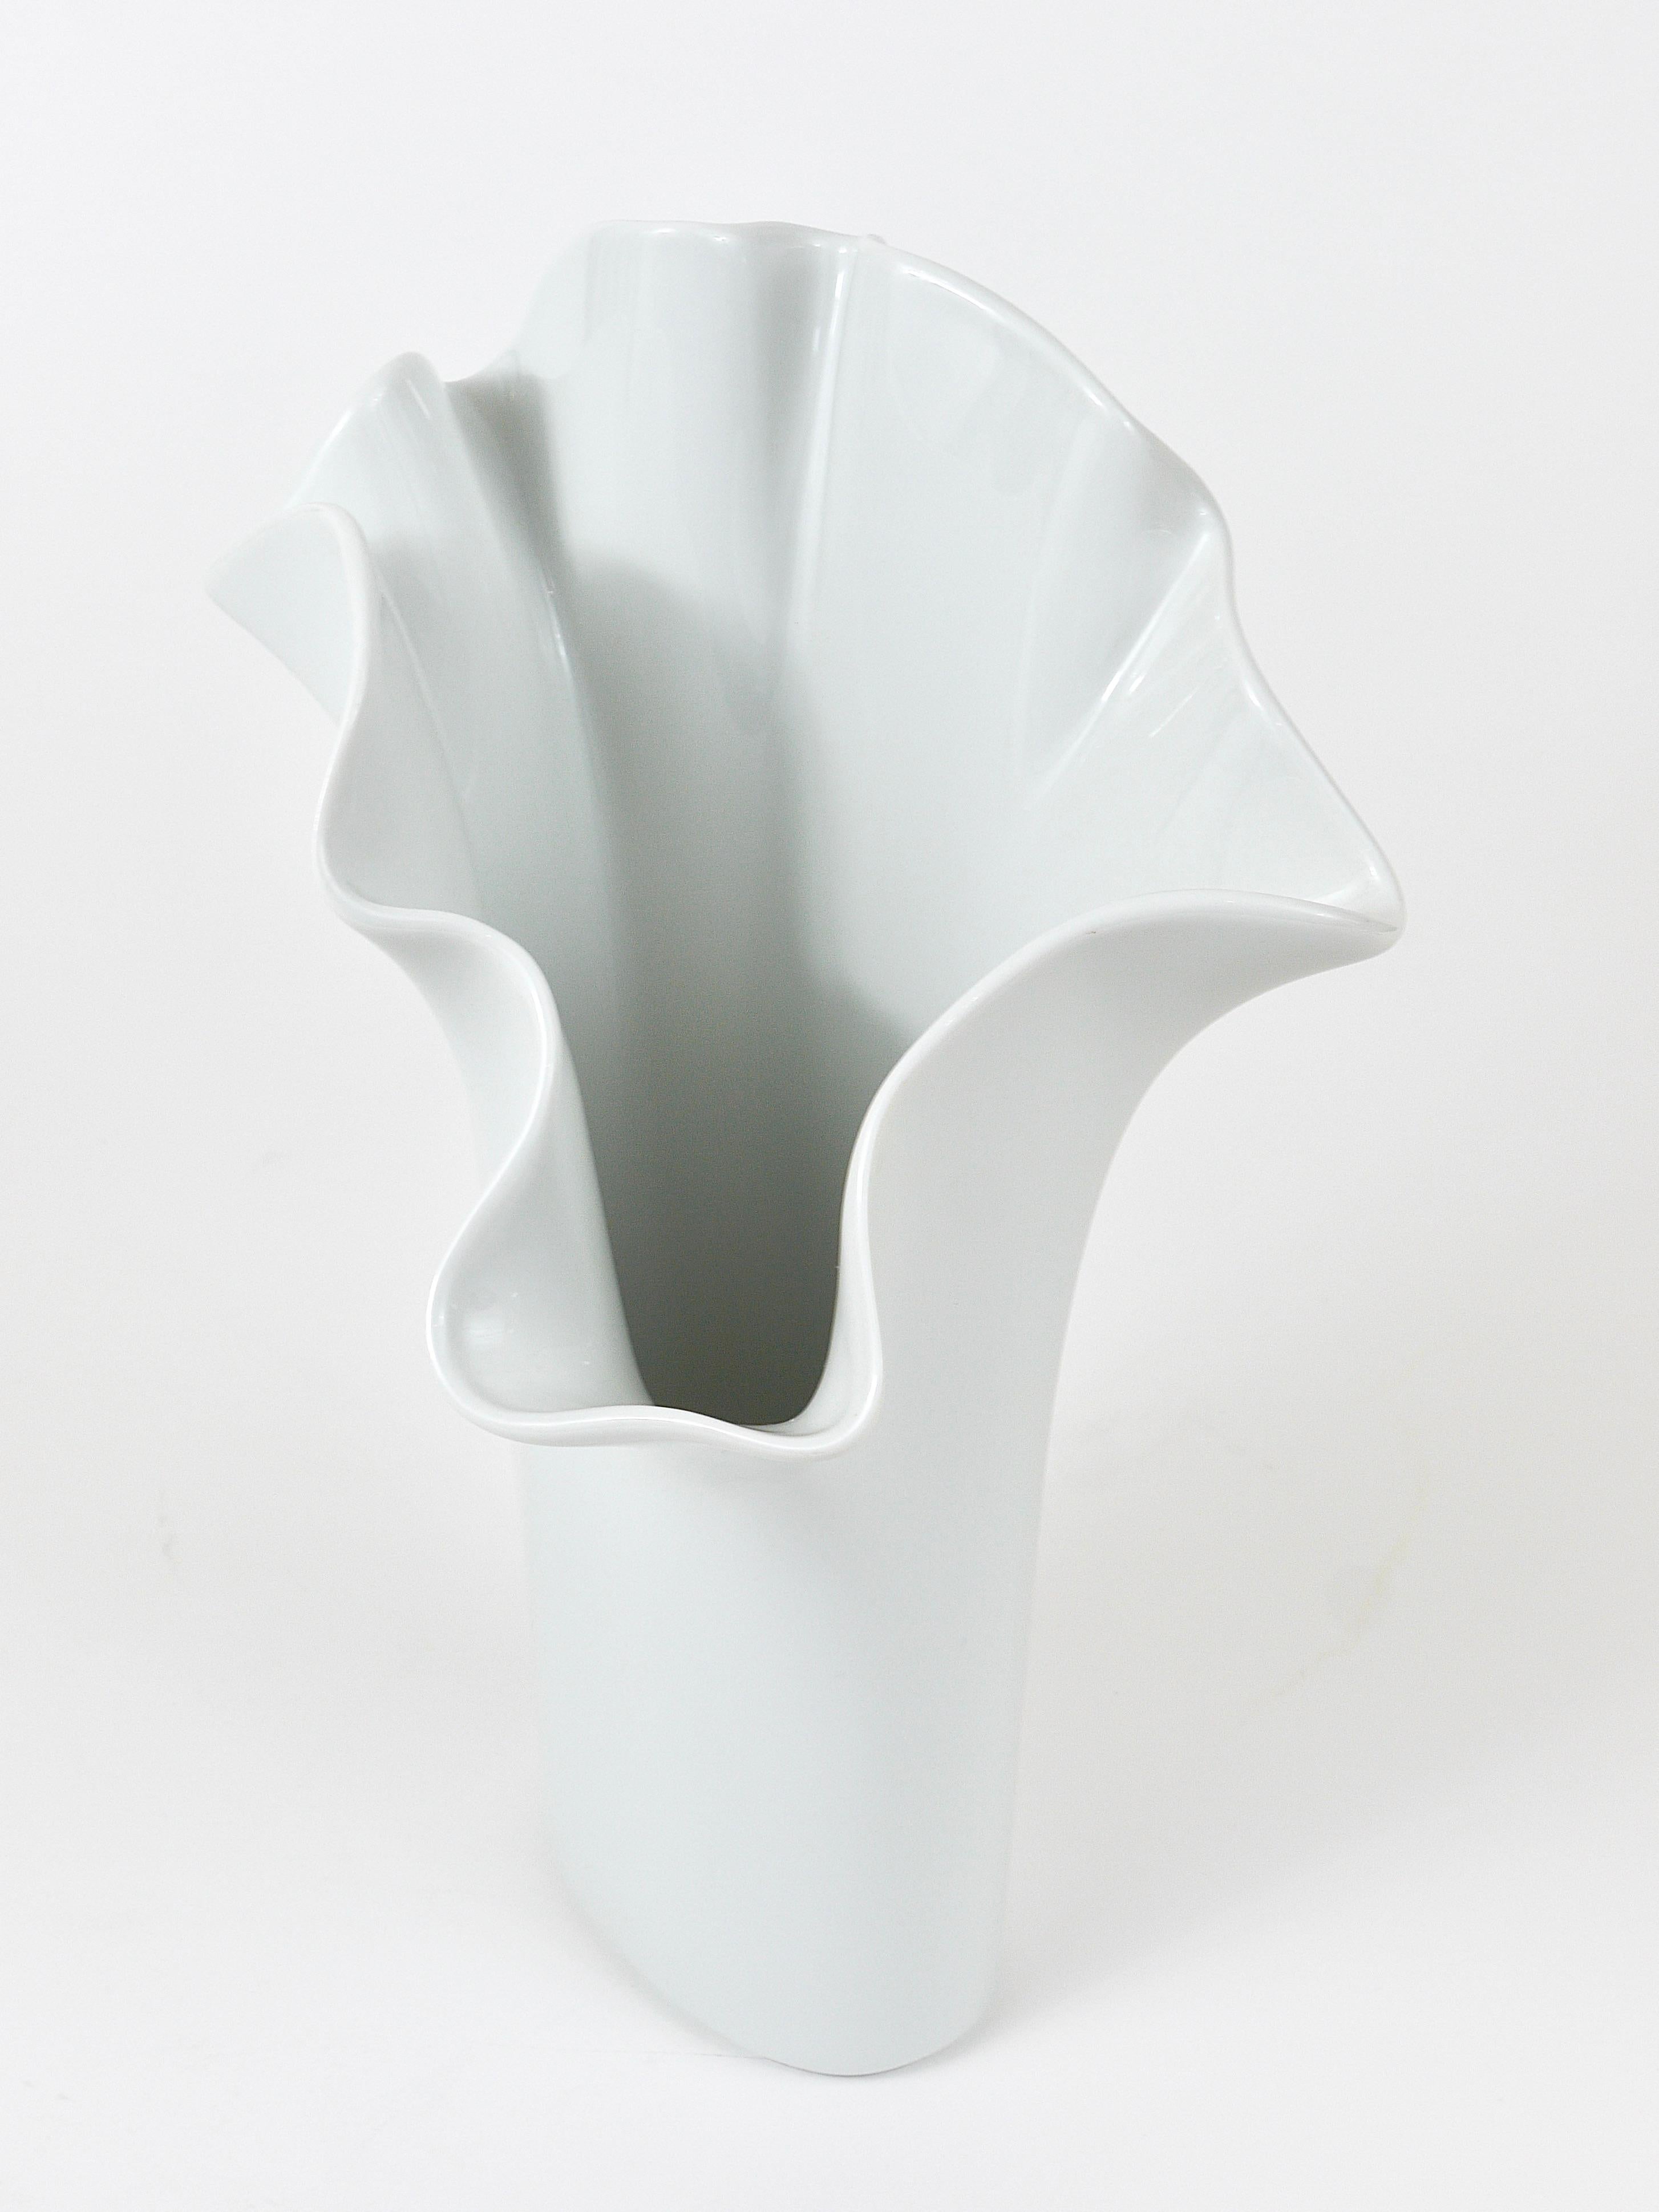 Rosenthal Studio-line Fazzoletto Asym Vase by Claus Josef Riedel, Germany, 1970s 8